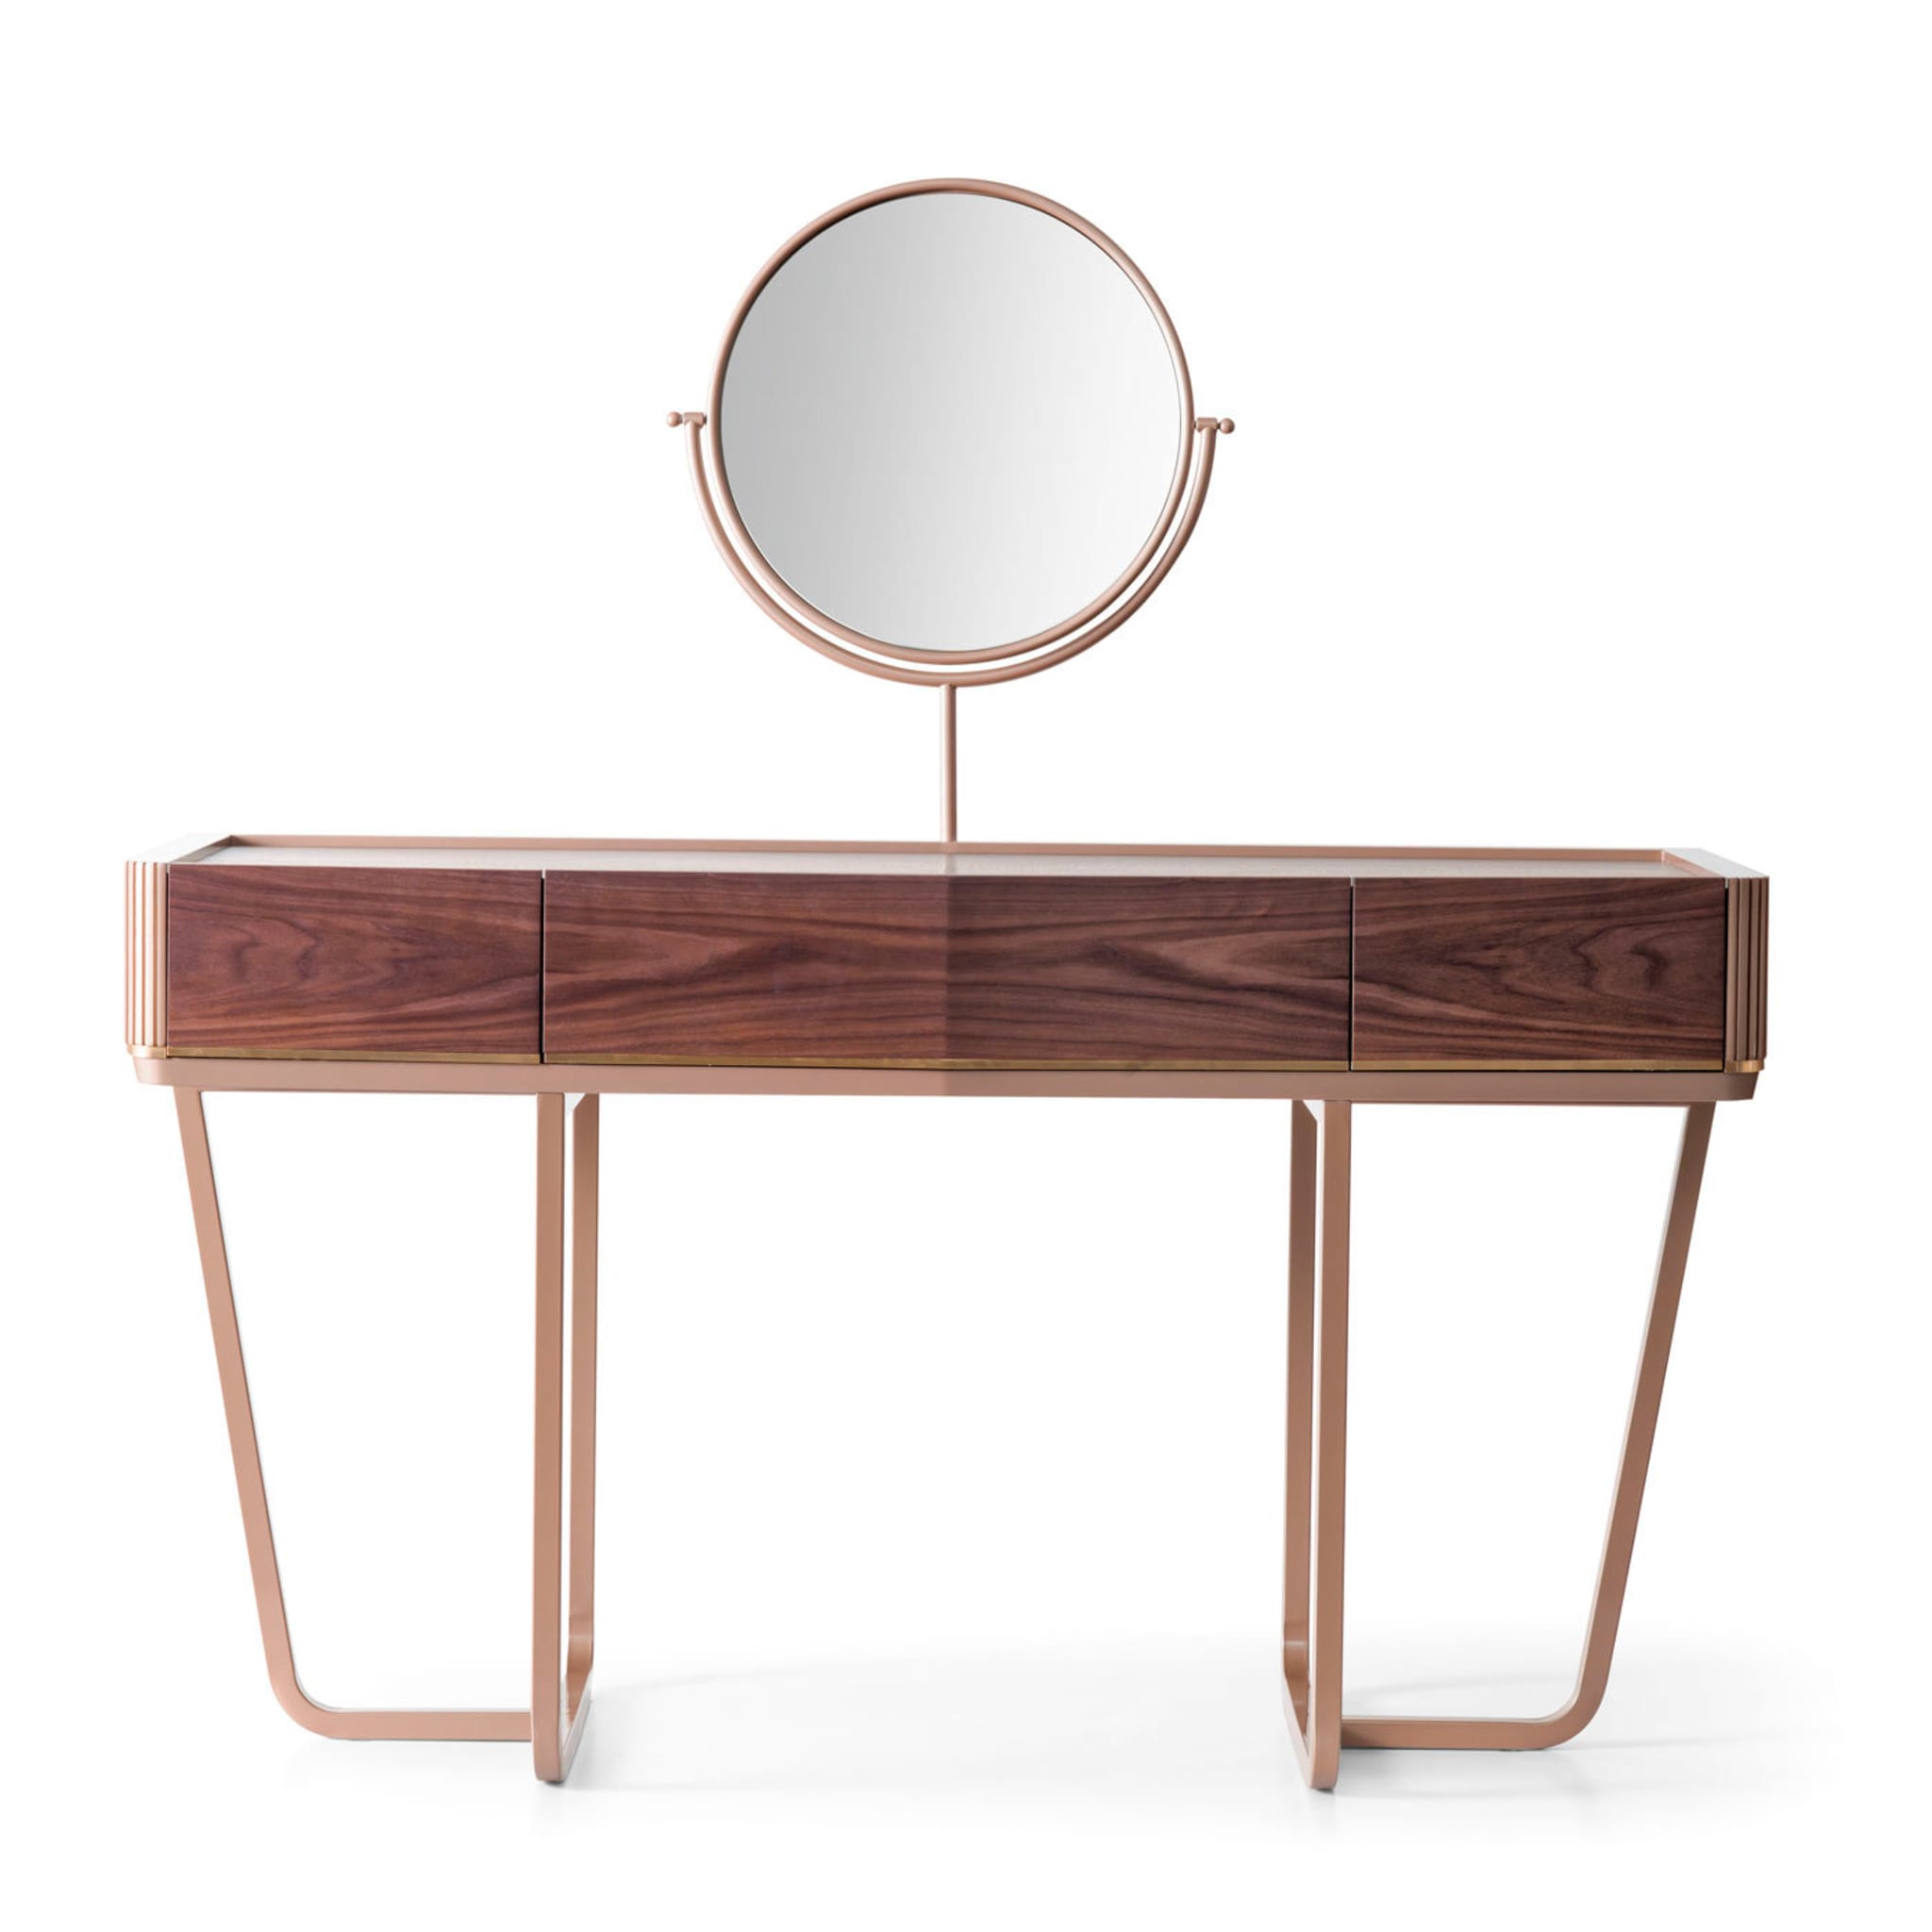 Beverly Canaletto Vanity Desk by Silvano Del Guerra - Alternative view 1